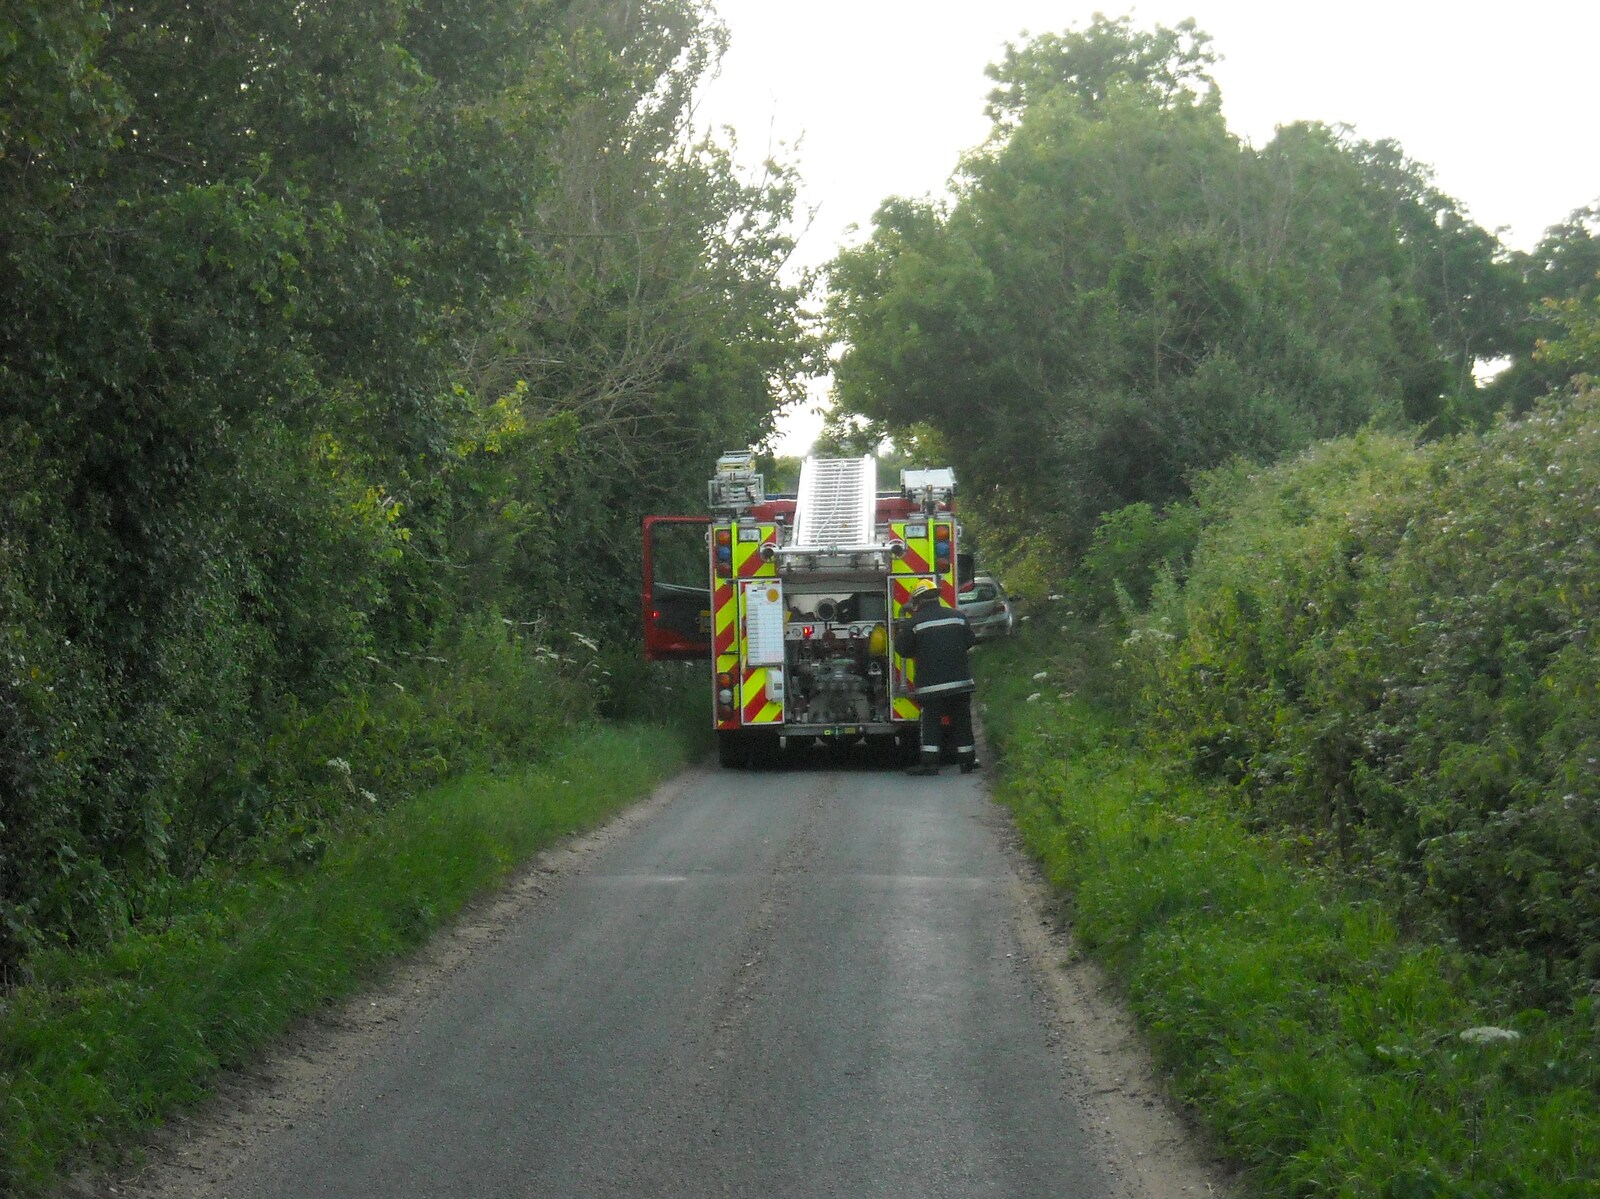 A fire engine blocks the lane from A Fire at Valley Farm, Thrandeston, Suffolk - 24th June 2009